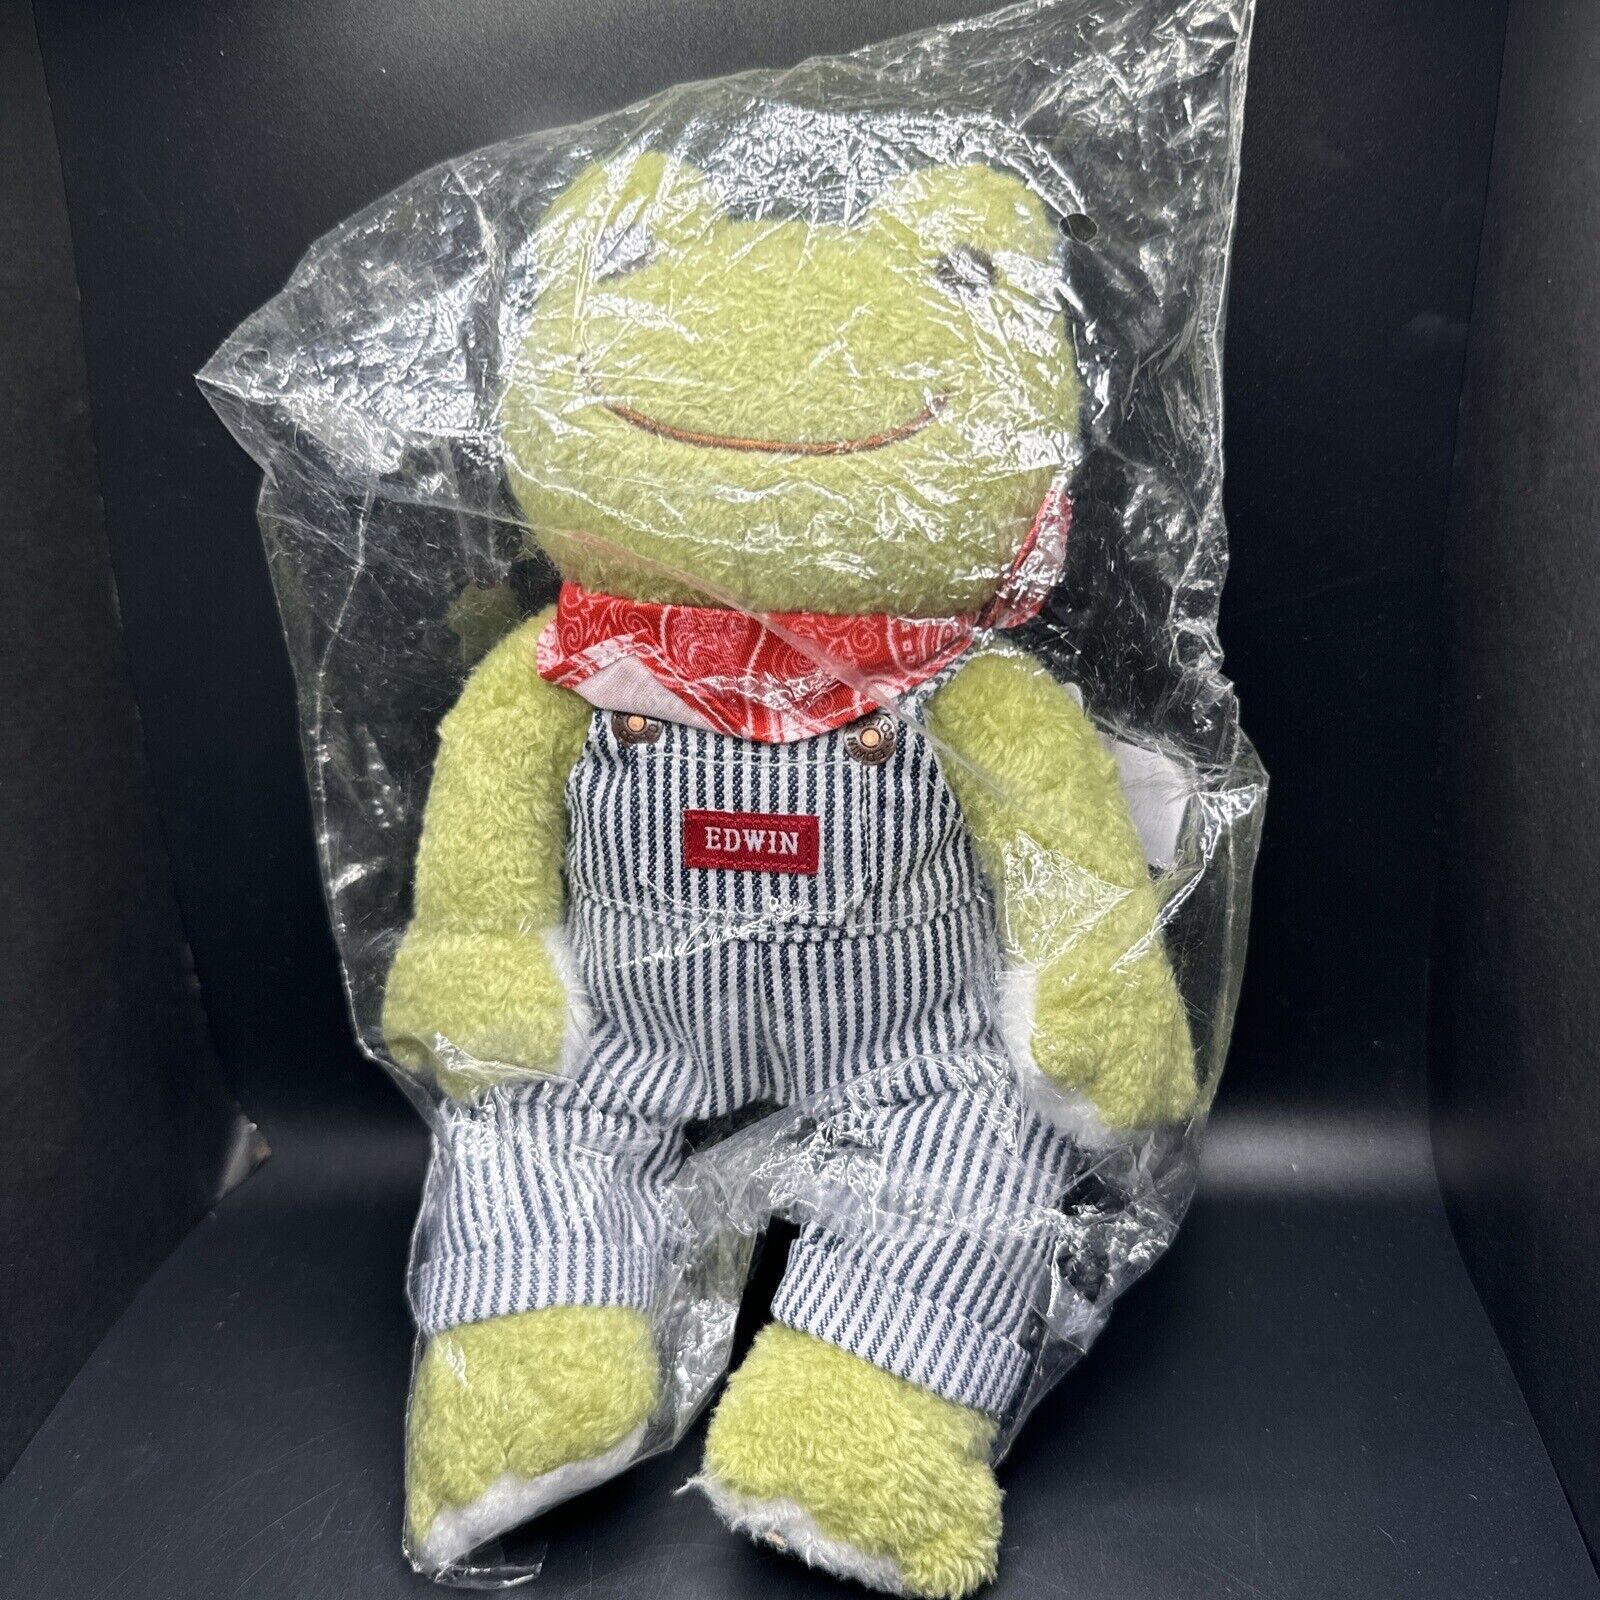 Pickles the Frog Bean Doll Plush EDWIN Overalls Japan